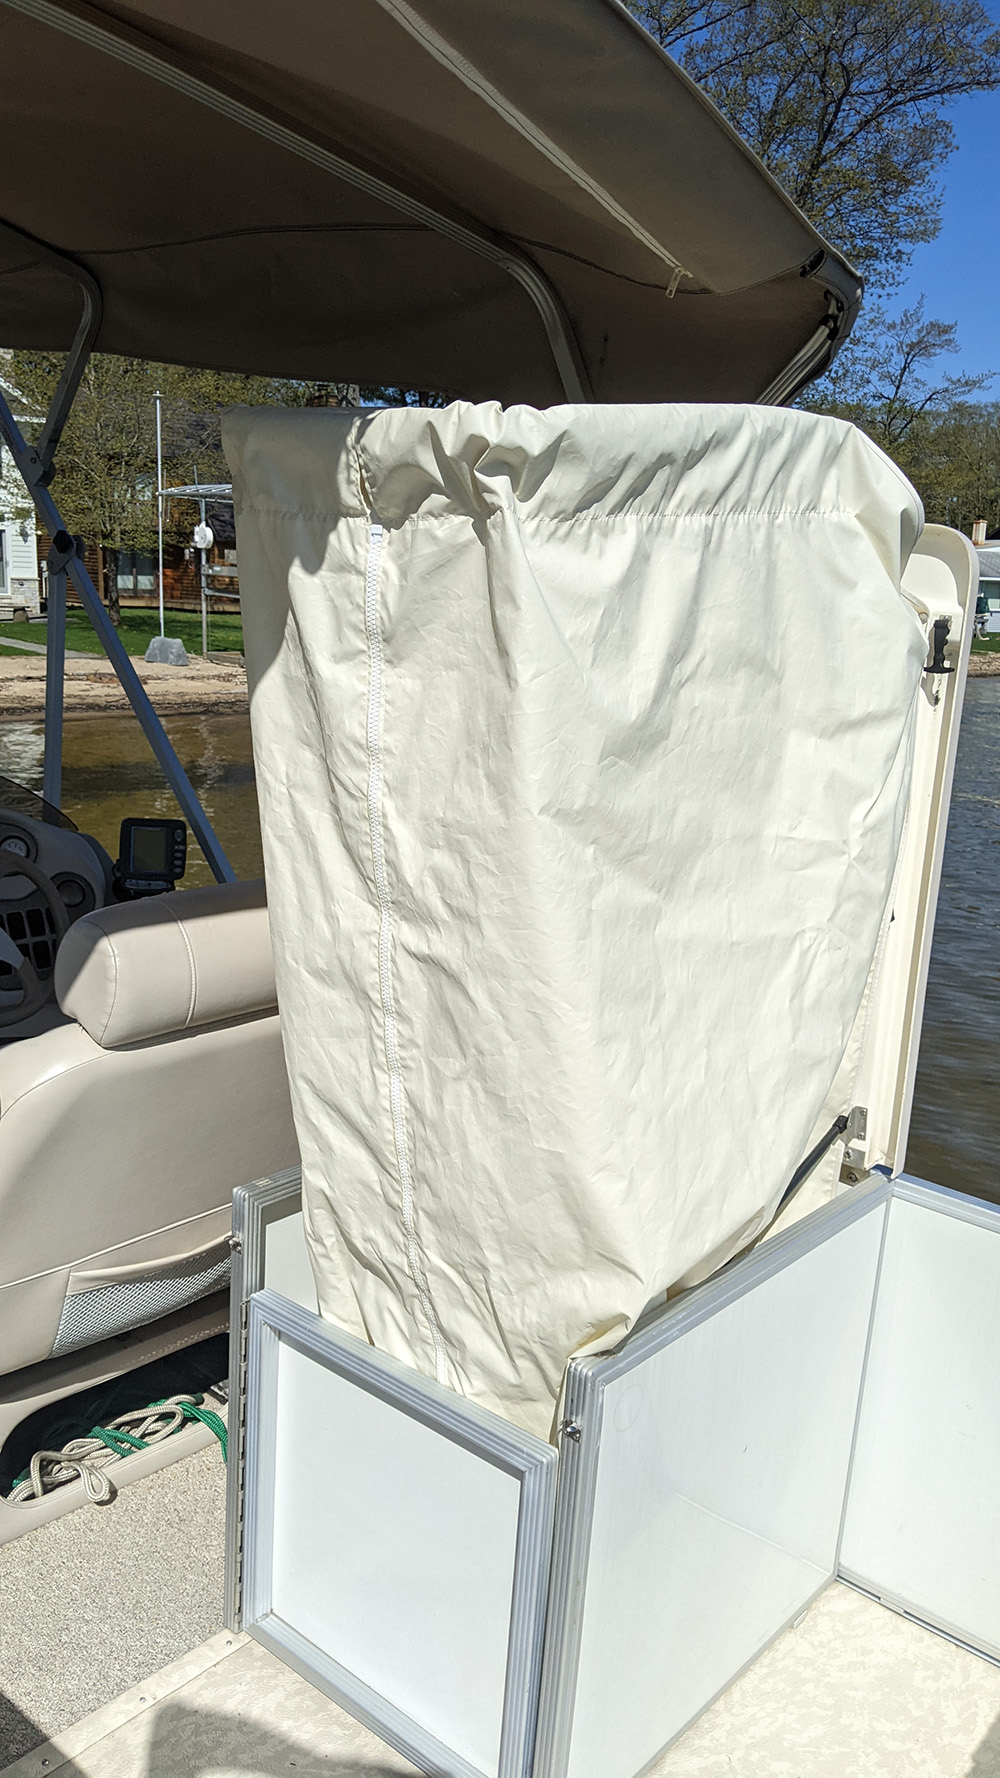 Crest fishing pontoon with 90 hp